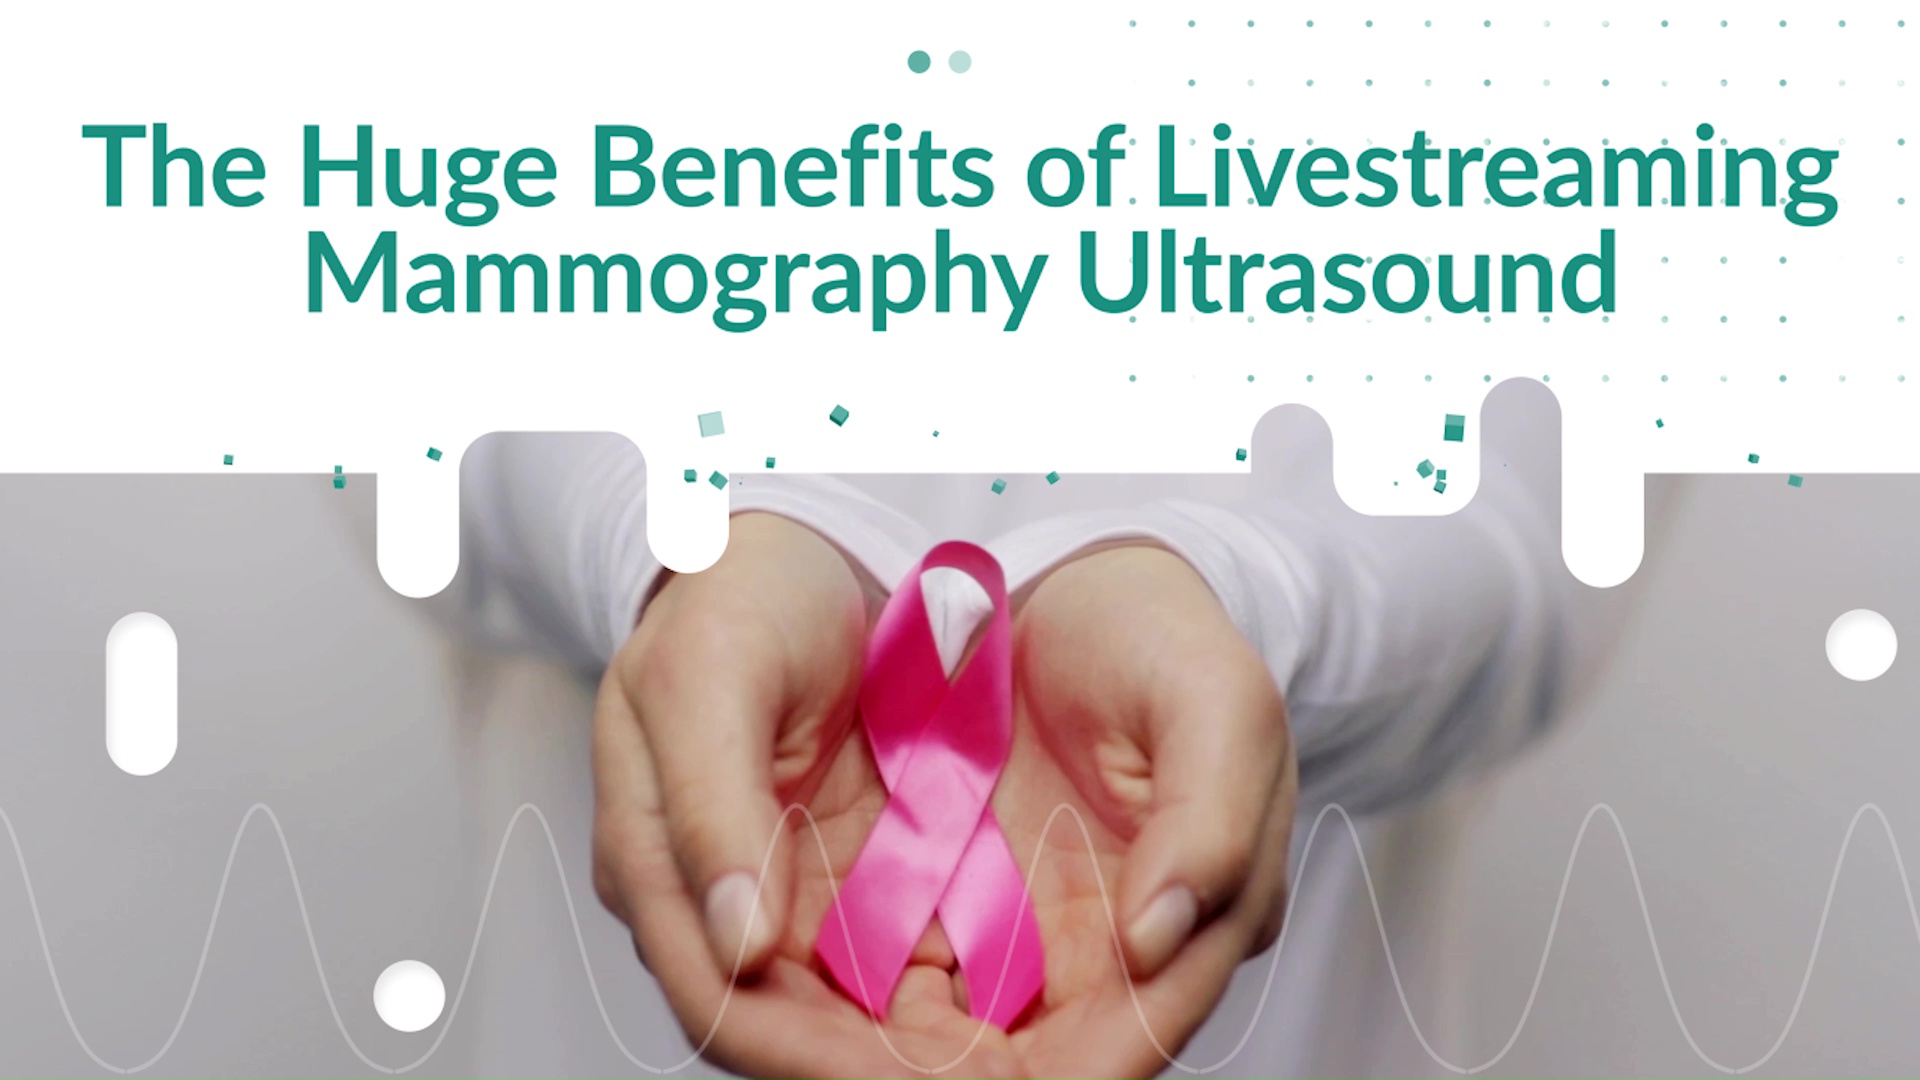 The Huge benefits of Livestreaming Mammography Ultrasound